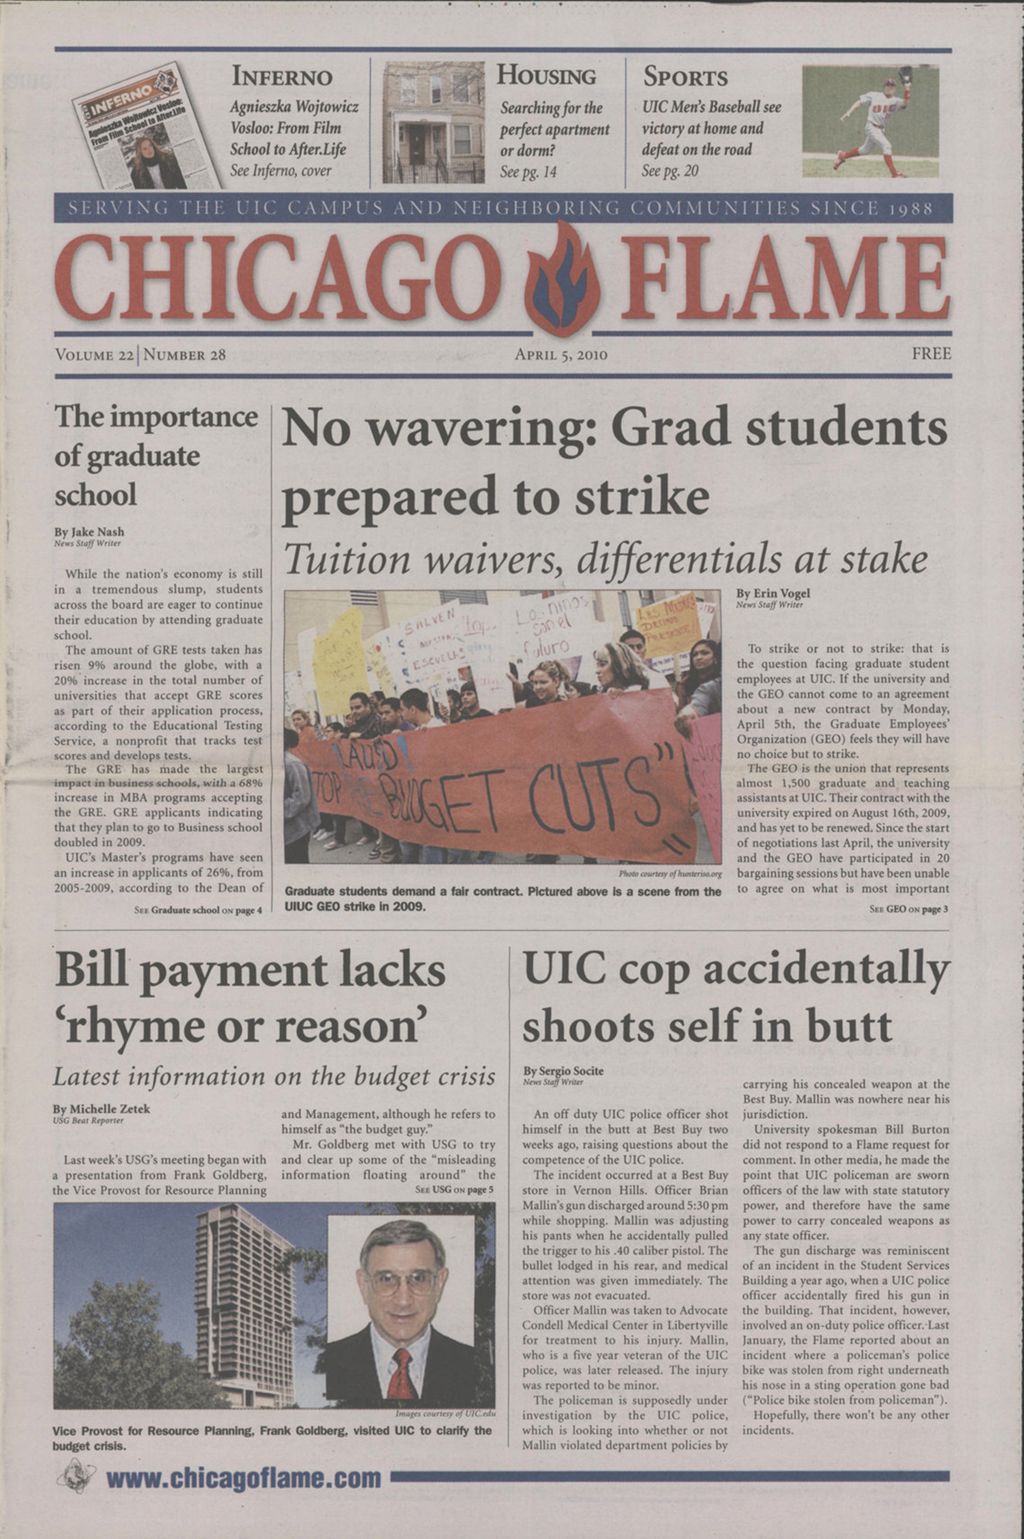 Chicago Flame (April 5, 2010)